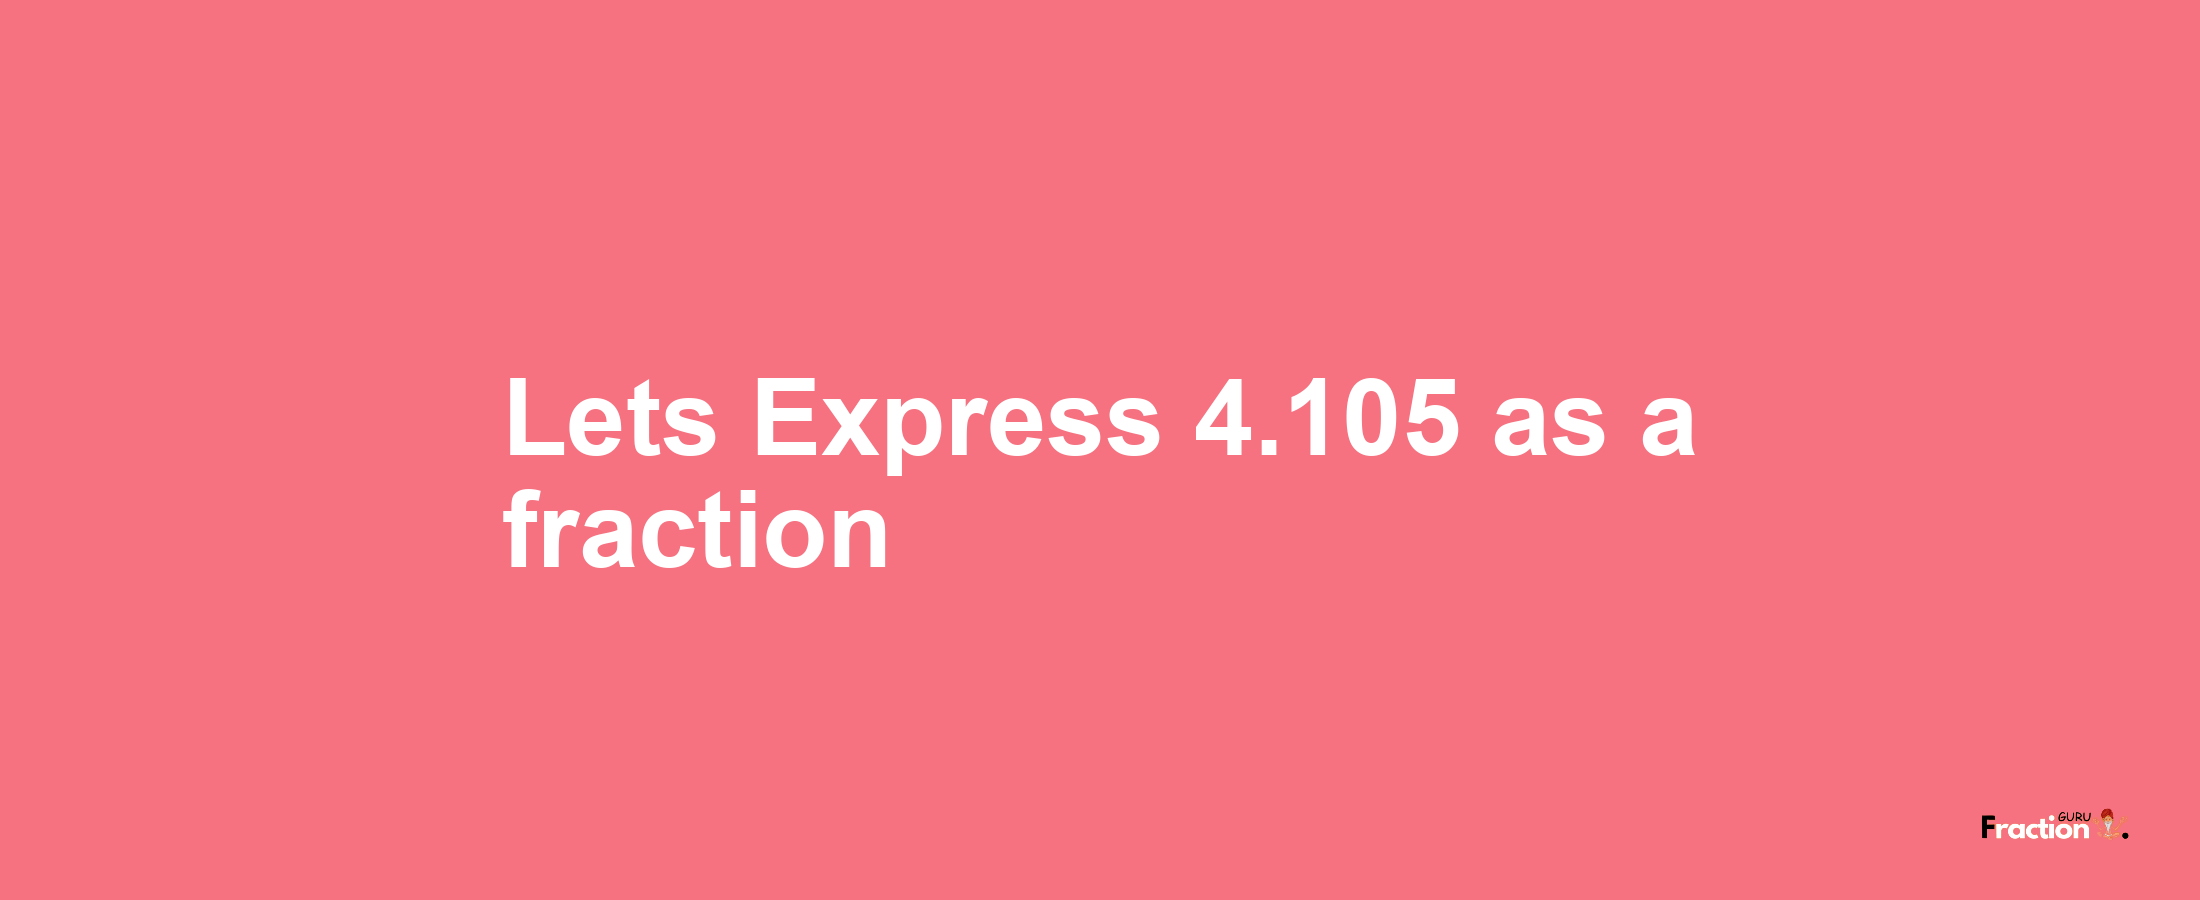 Lets Express 4.105 as afraction